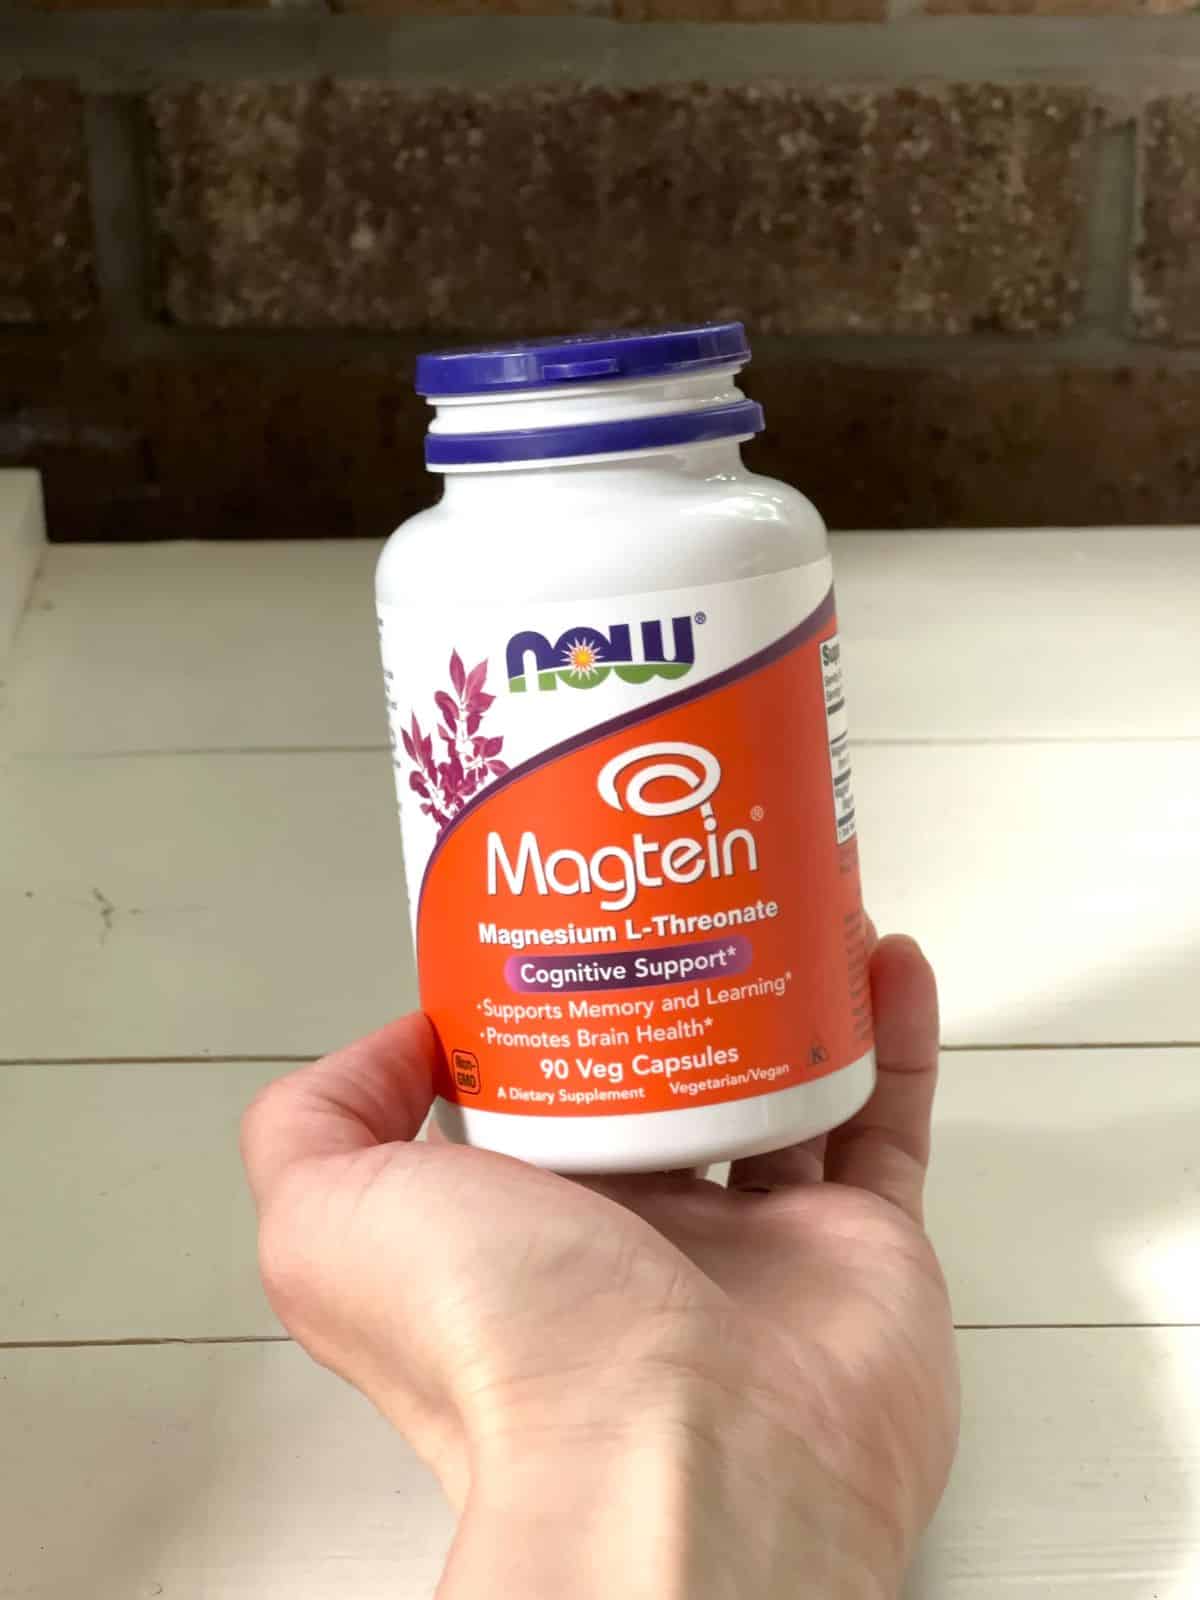 The blog author's hand holding a bottle of NOW Magtein Magnesium L-Threonate.